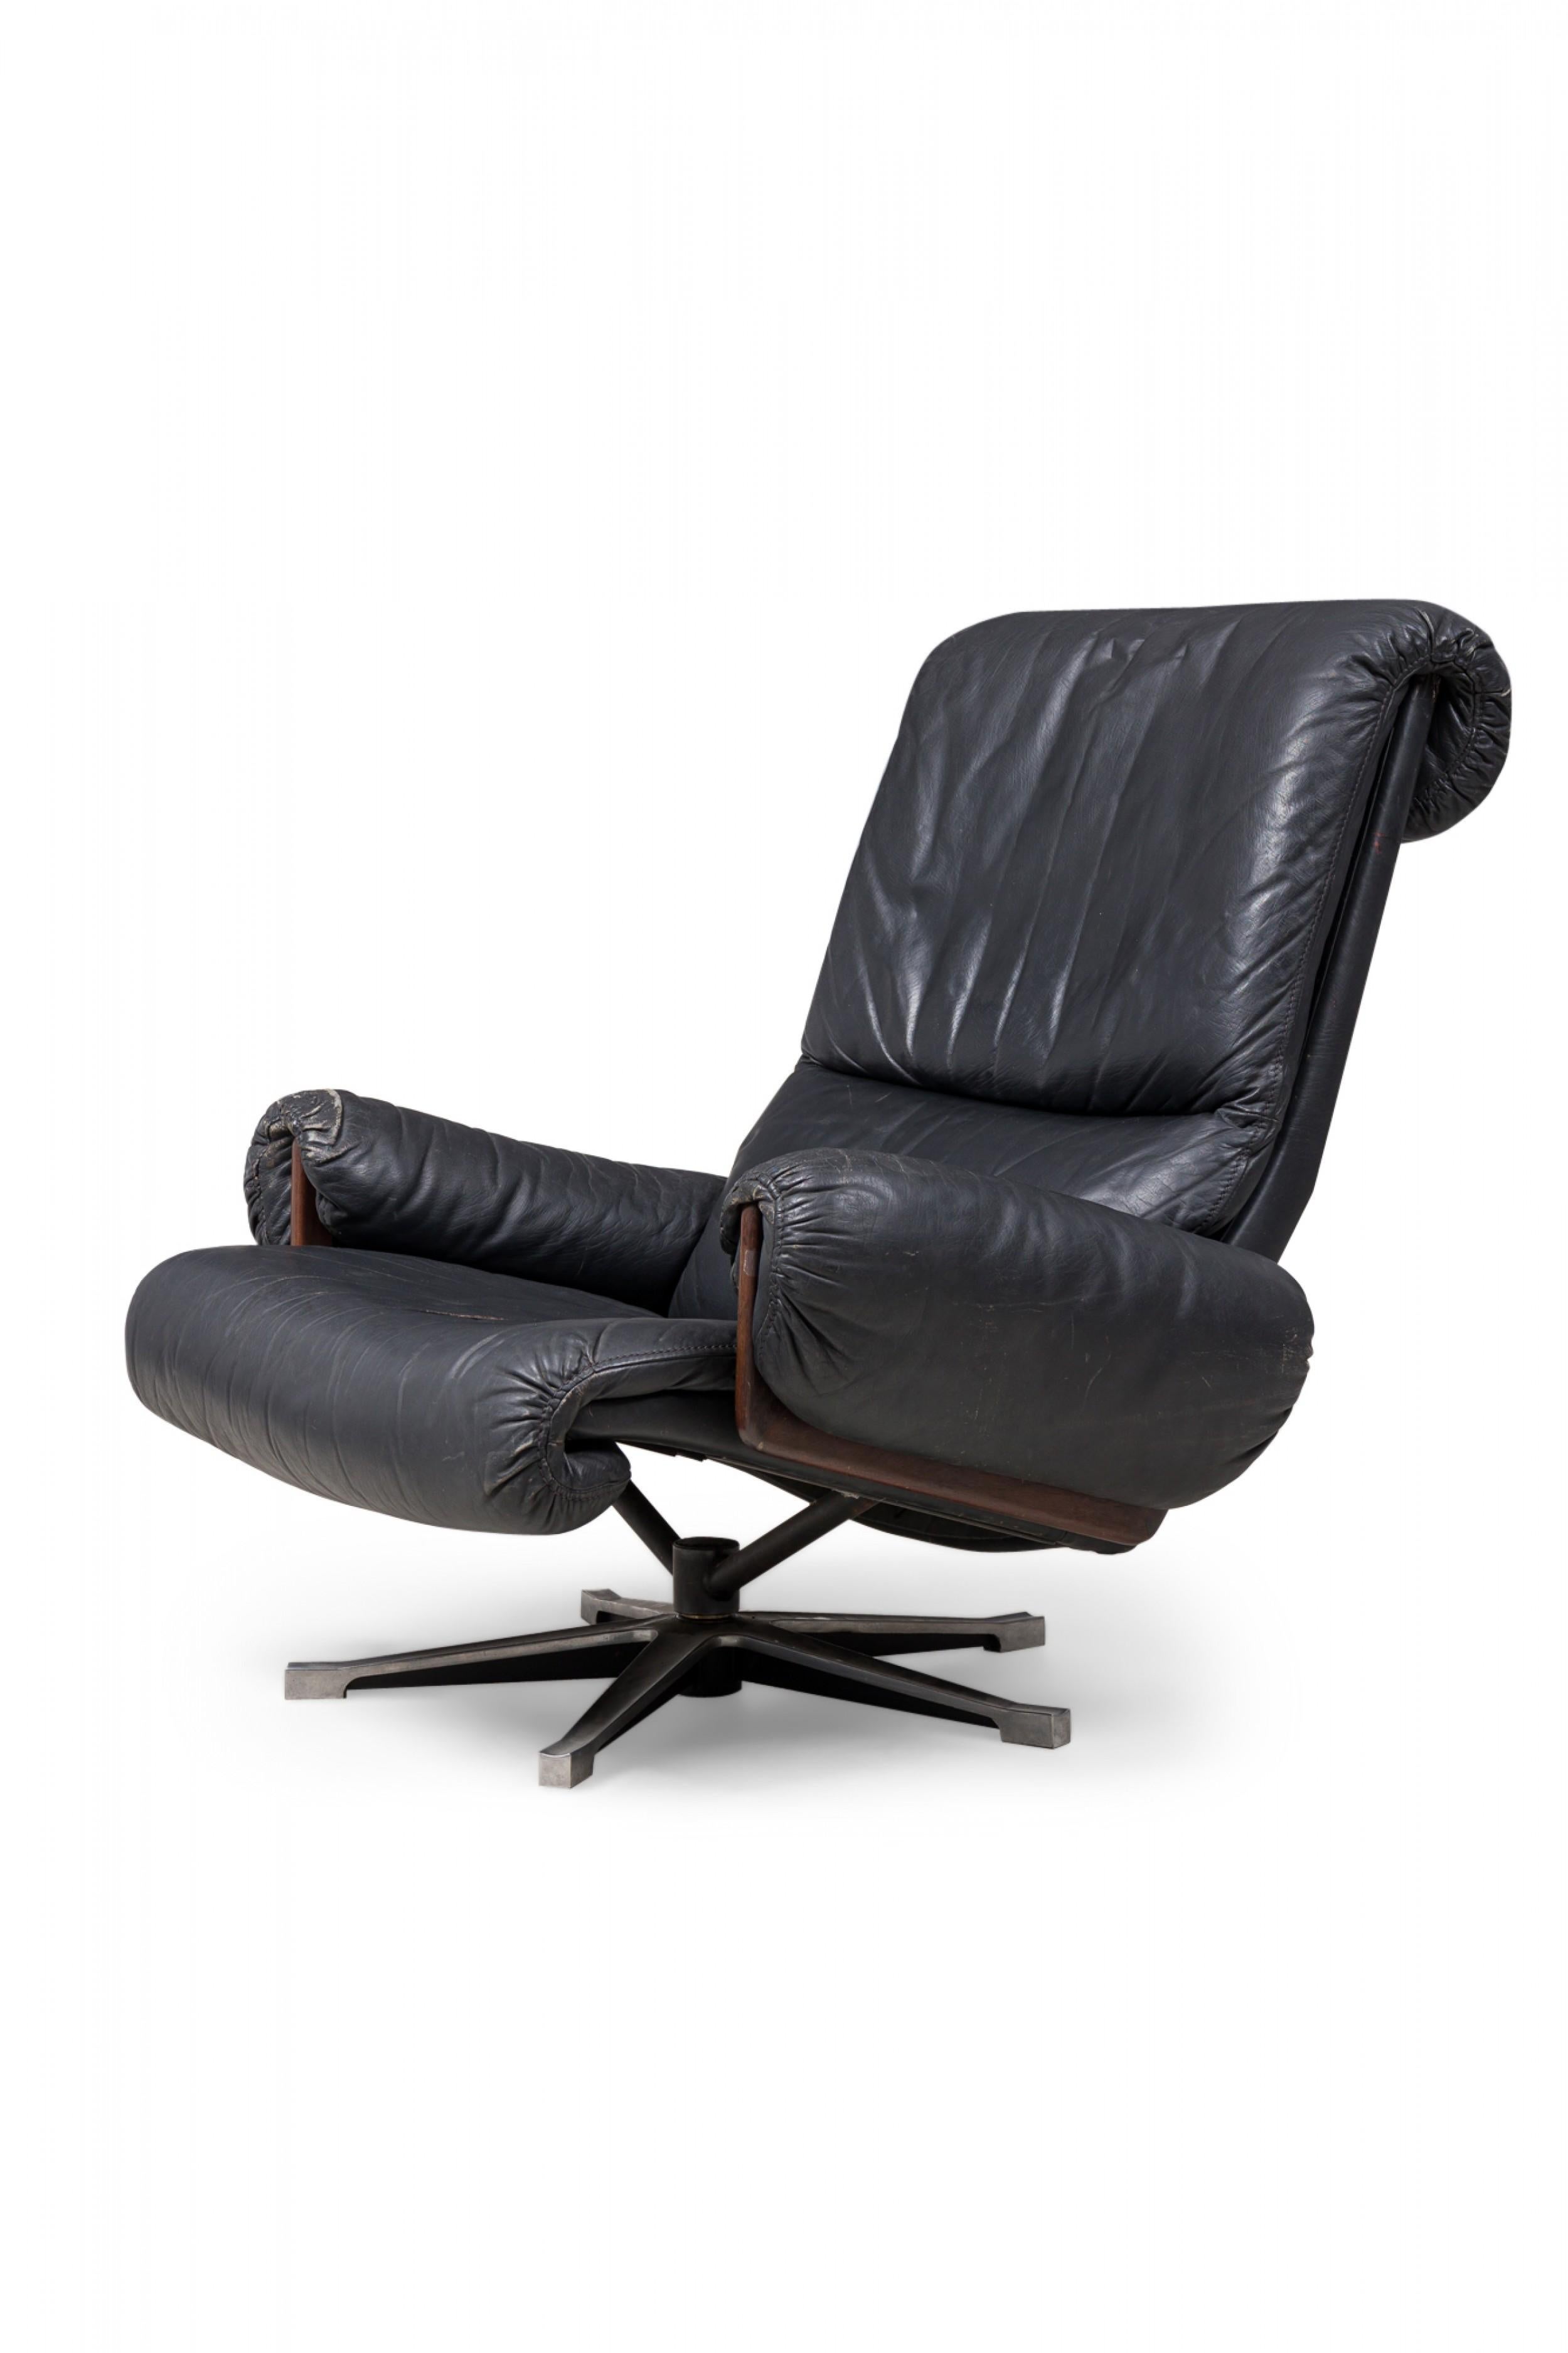 Desede Midcentury Swiss Metal & Black Leather Upholstered Swivel Chair For Sale